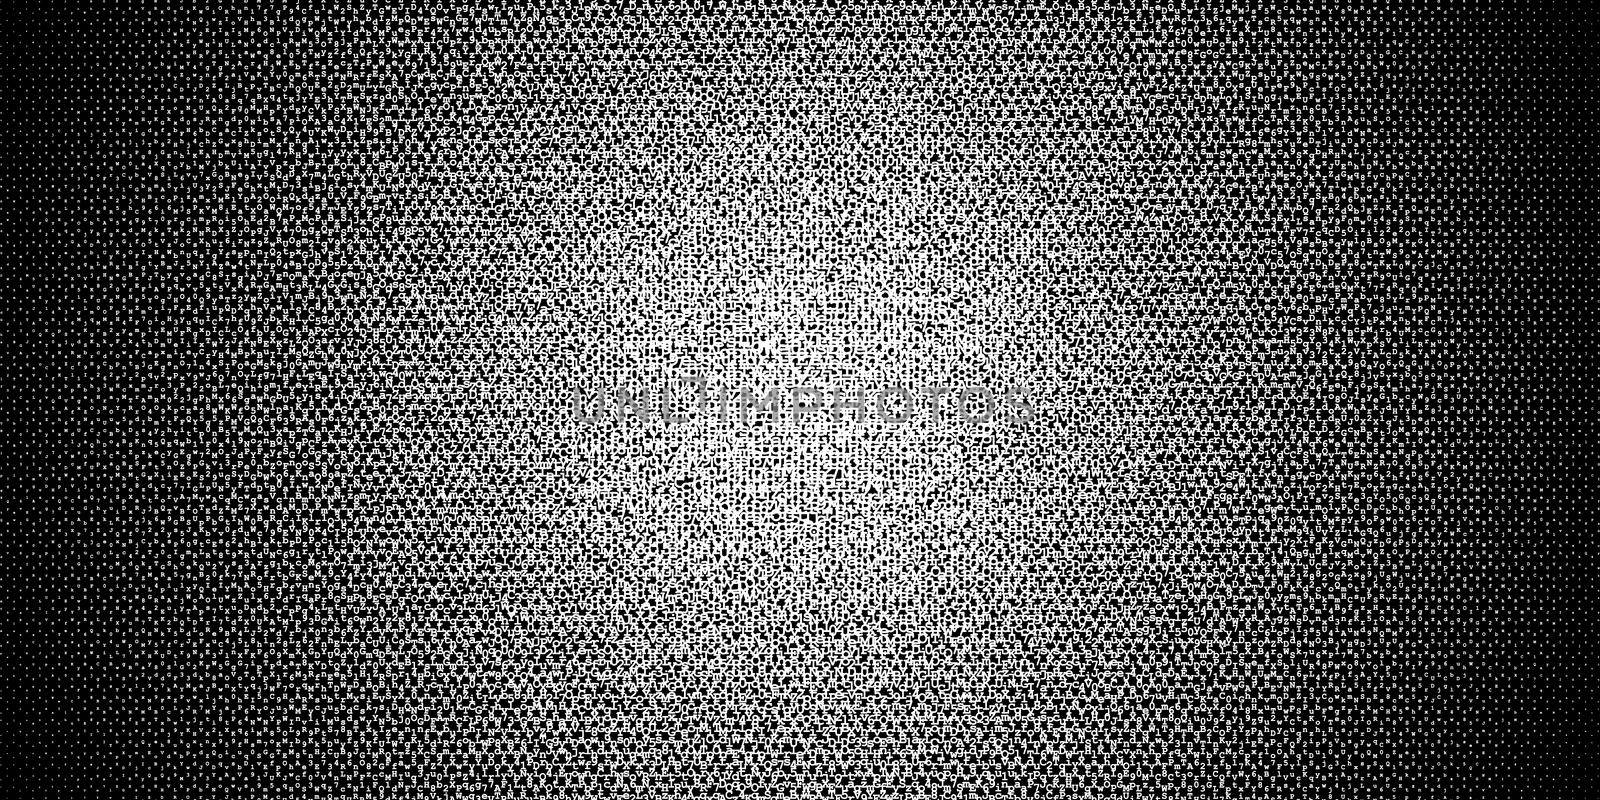 Halftone gradient made of letters and digits by dutourdumonde